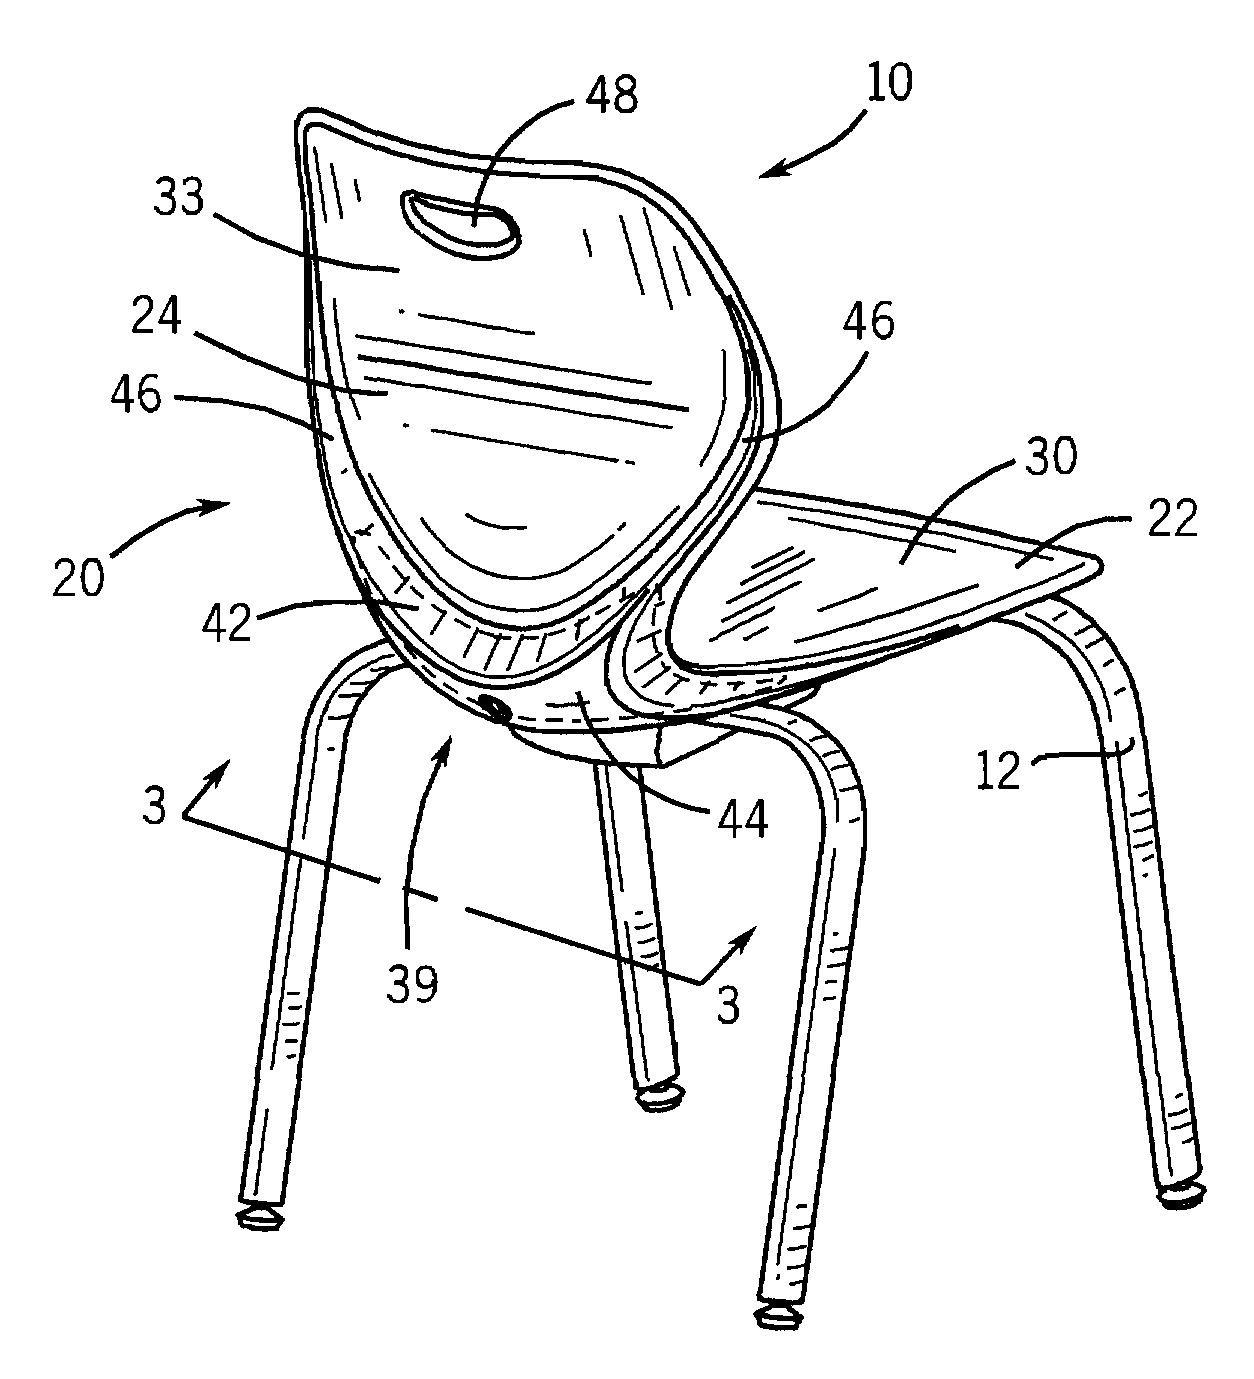 Chair shell with integral hollow contoured support